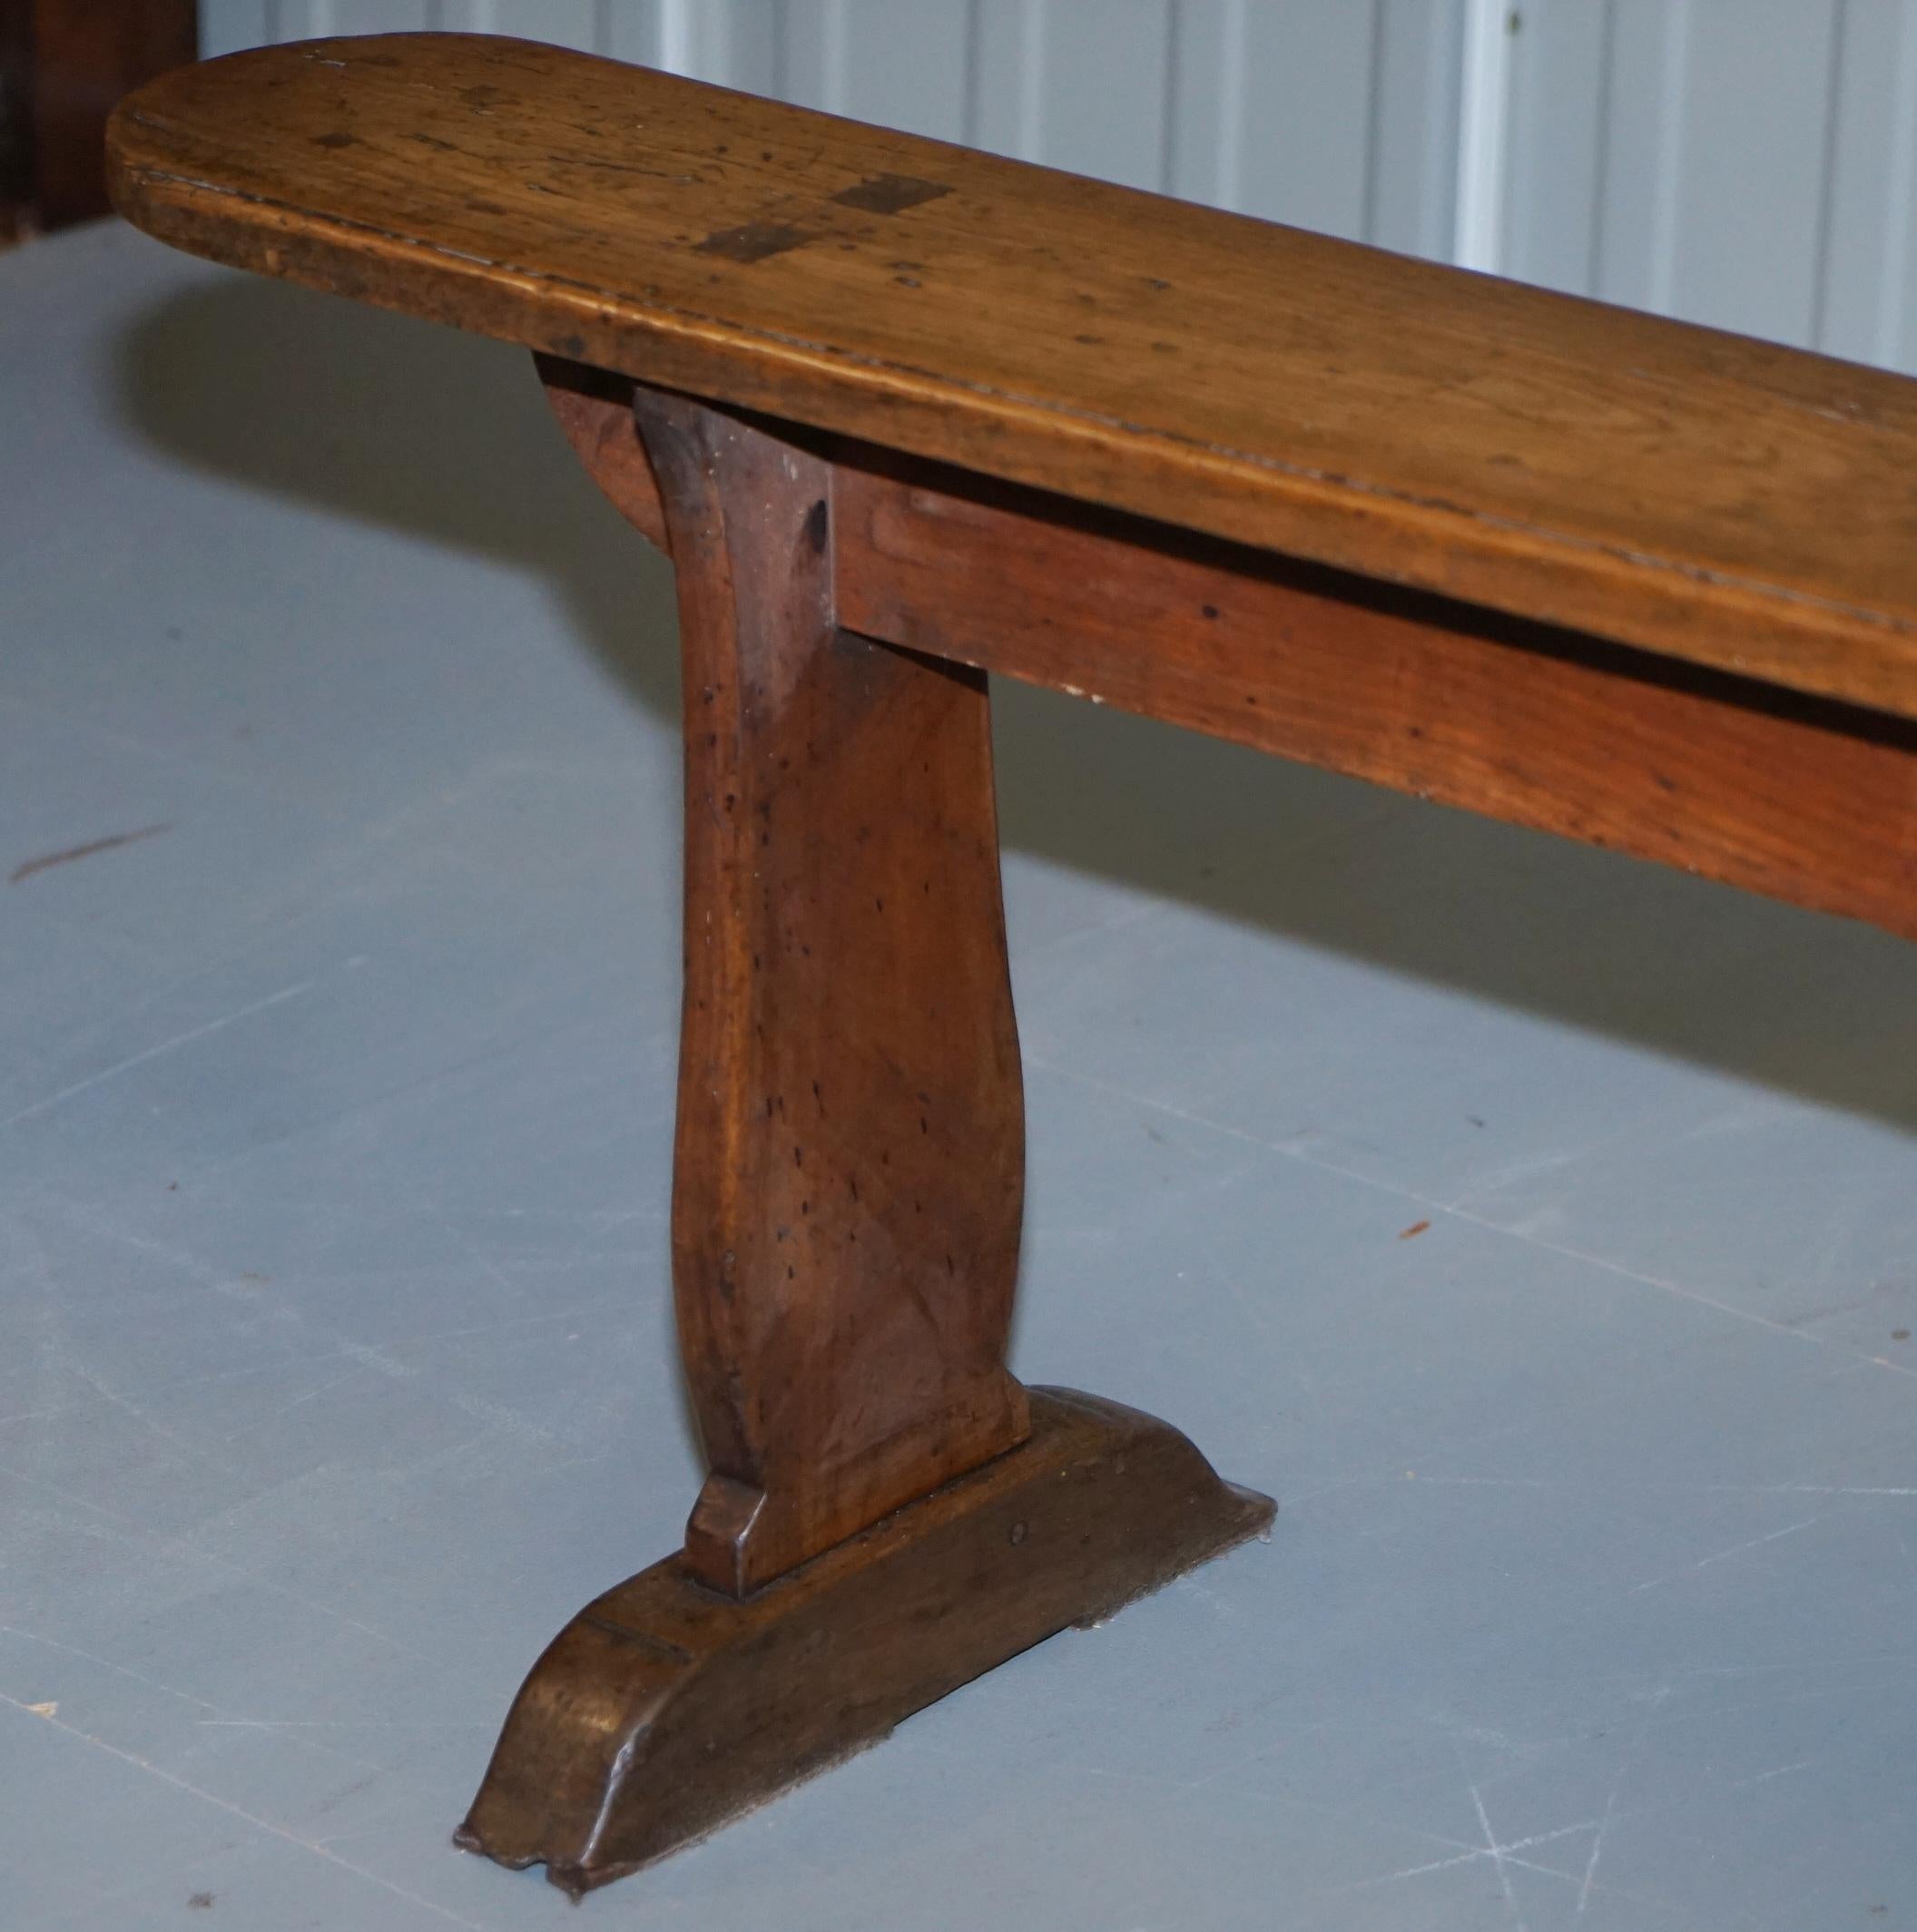 PAIR OF CIRCA 1800 FRENCH PROVINCIAL FRUITWOOD 2 METER REFECTORY TABLE BENCHEs 11